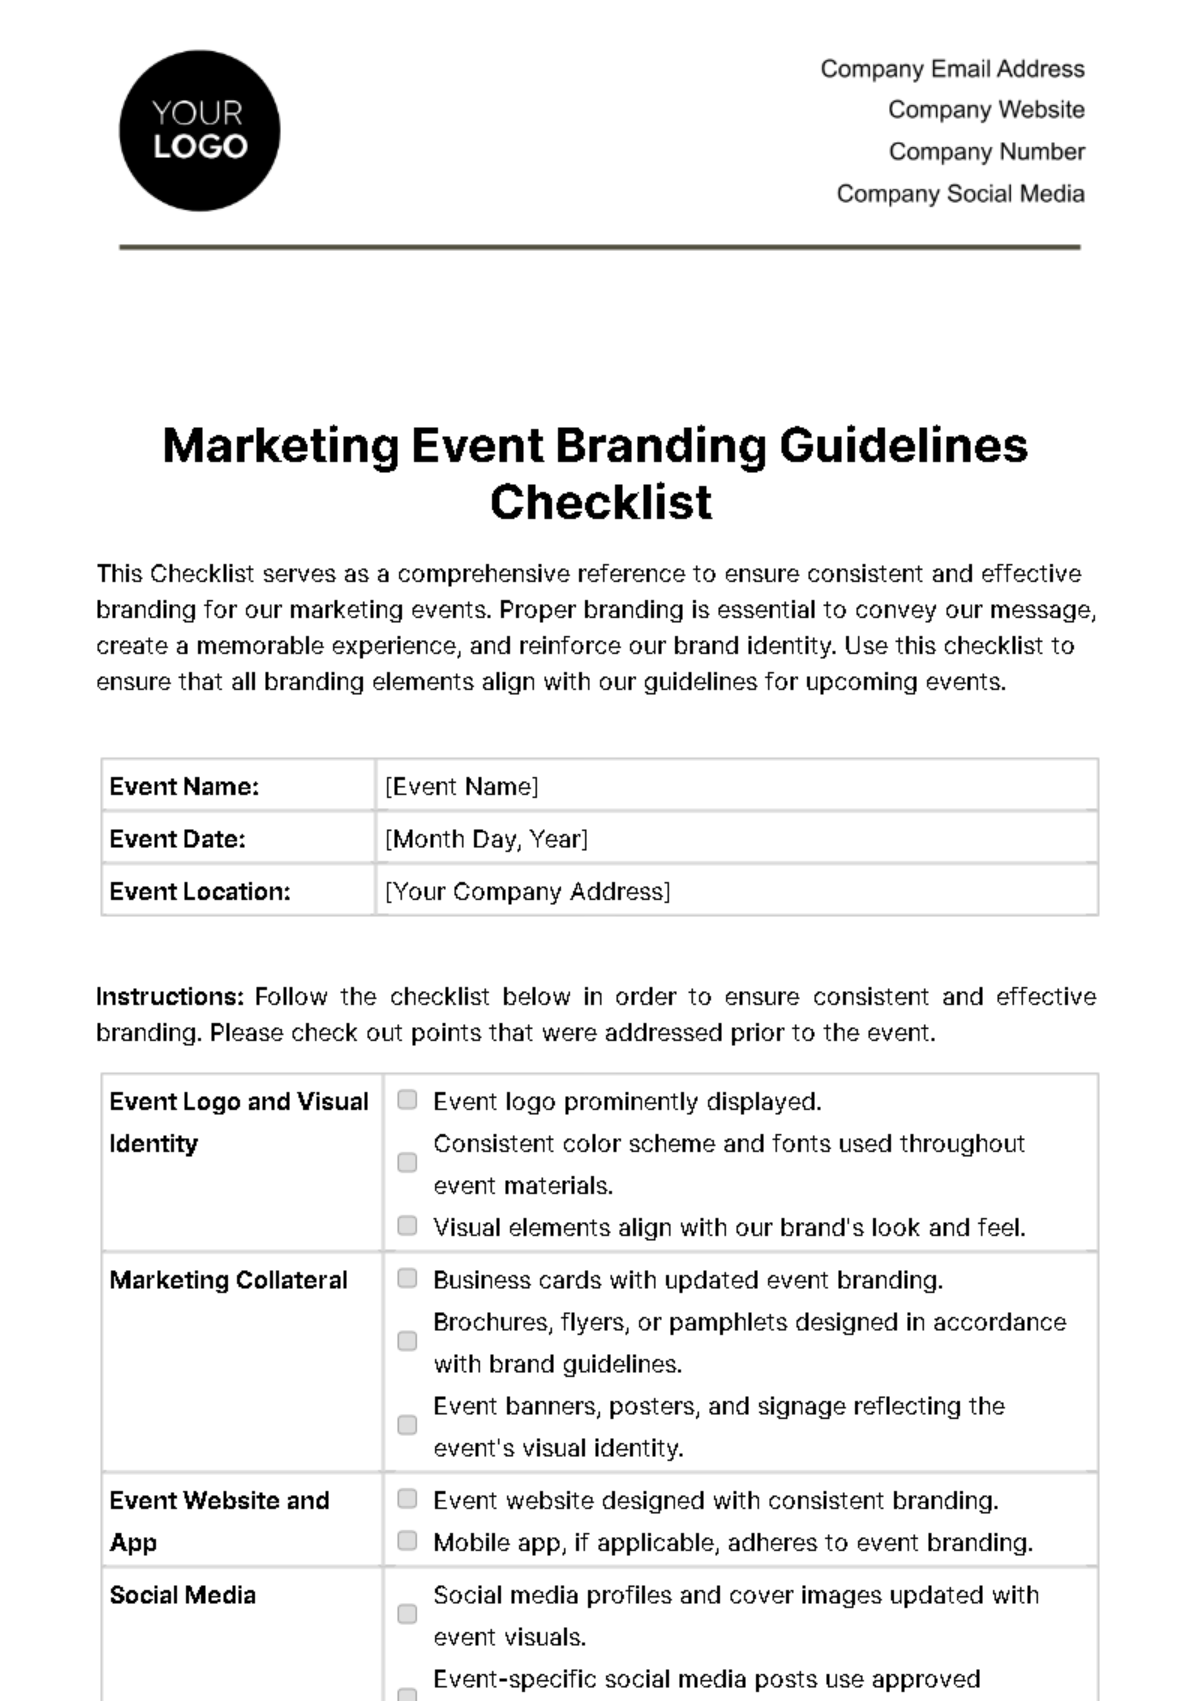 Free Marketing Event Branding Guidelines Checklist Template